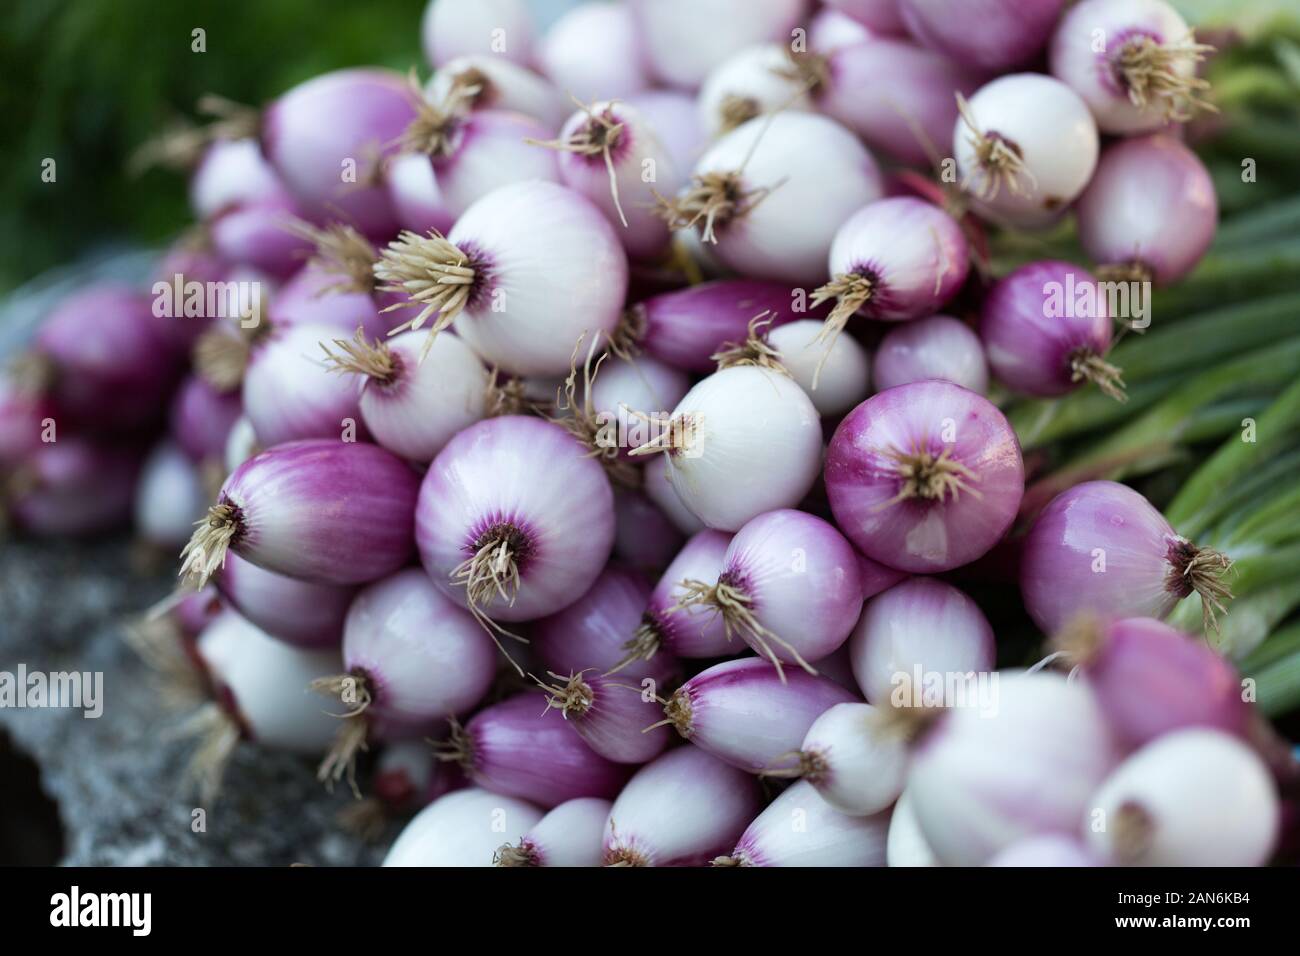 Close up view on a bunch of white onions. Fresh for sale at a farmers market. Healthy raw vegetable. Ingredient of many different meals. Stock Photo